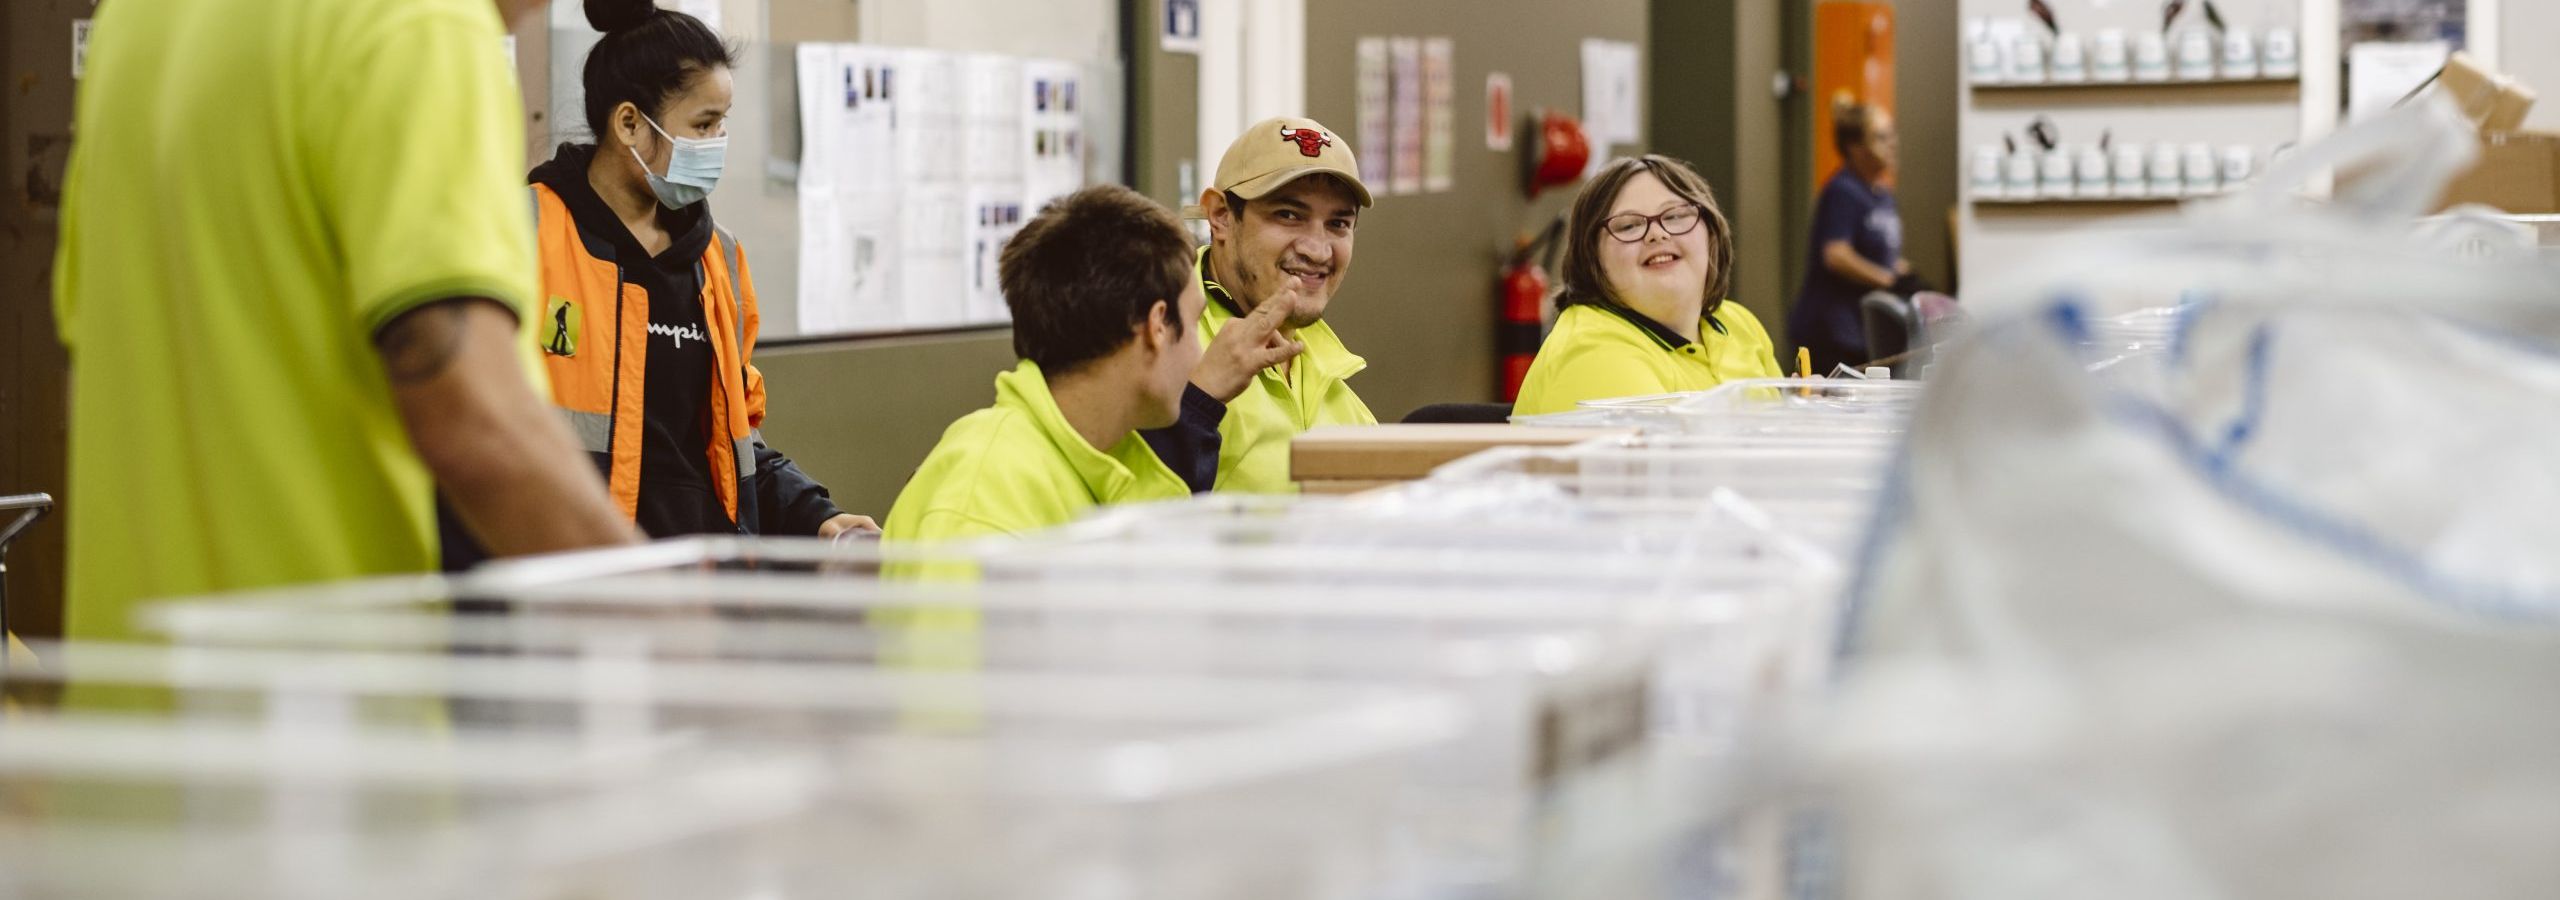 employees in high visibility uniform smiling while at work in a supported employment environment